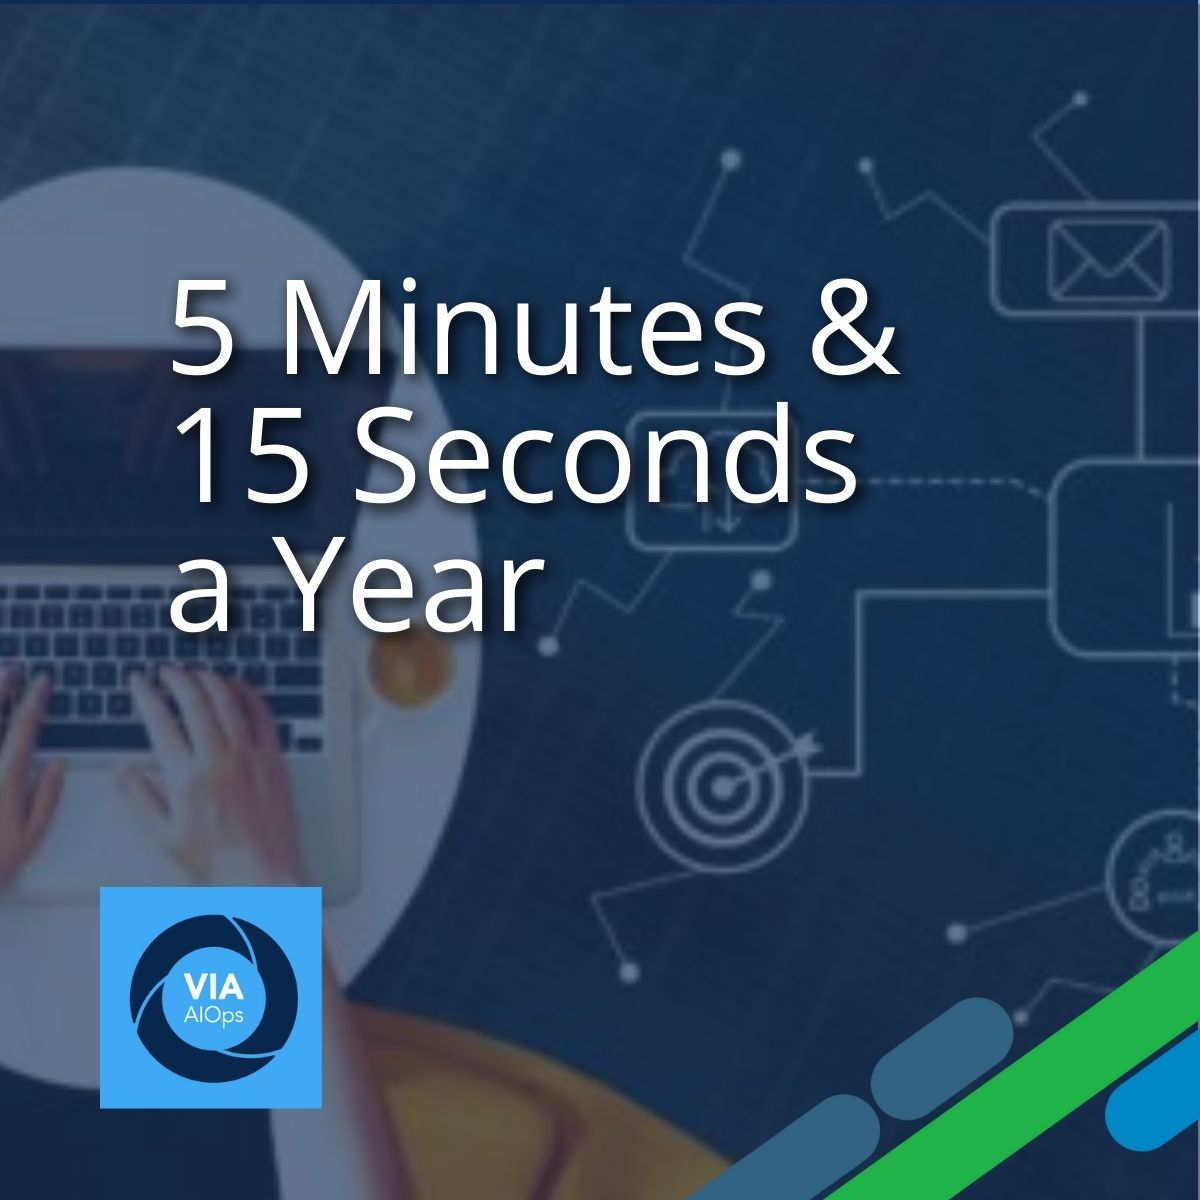 5 minutes and 15 second a year via AIOps